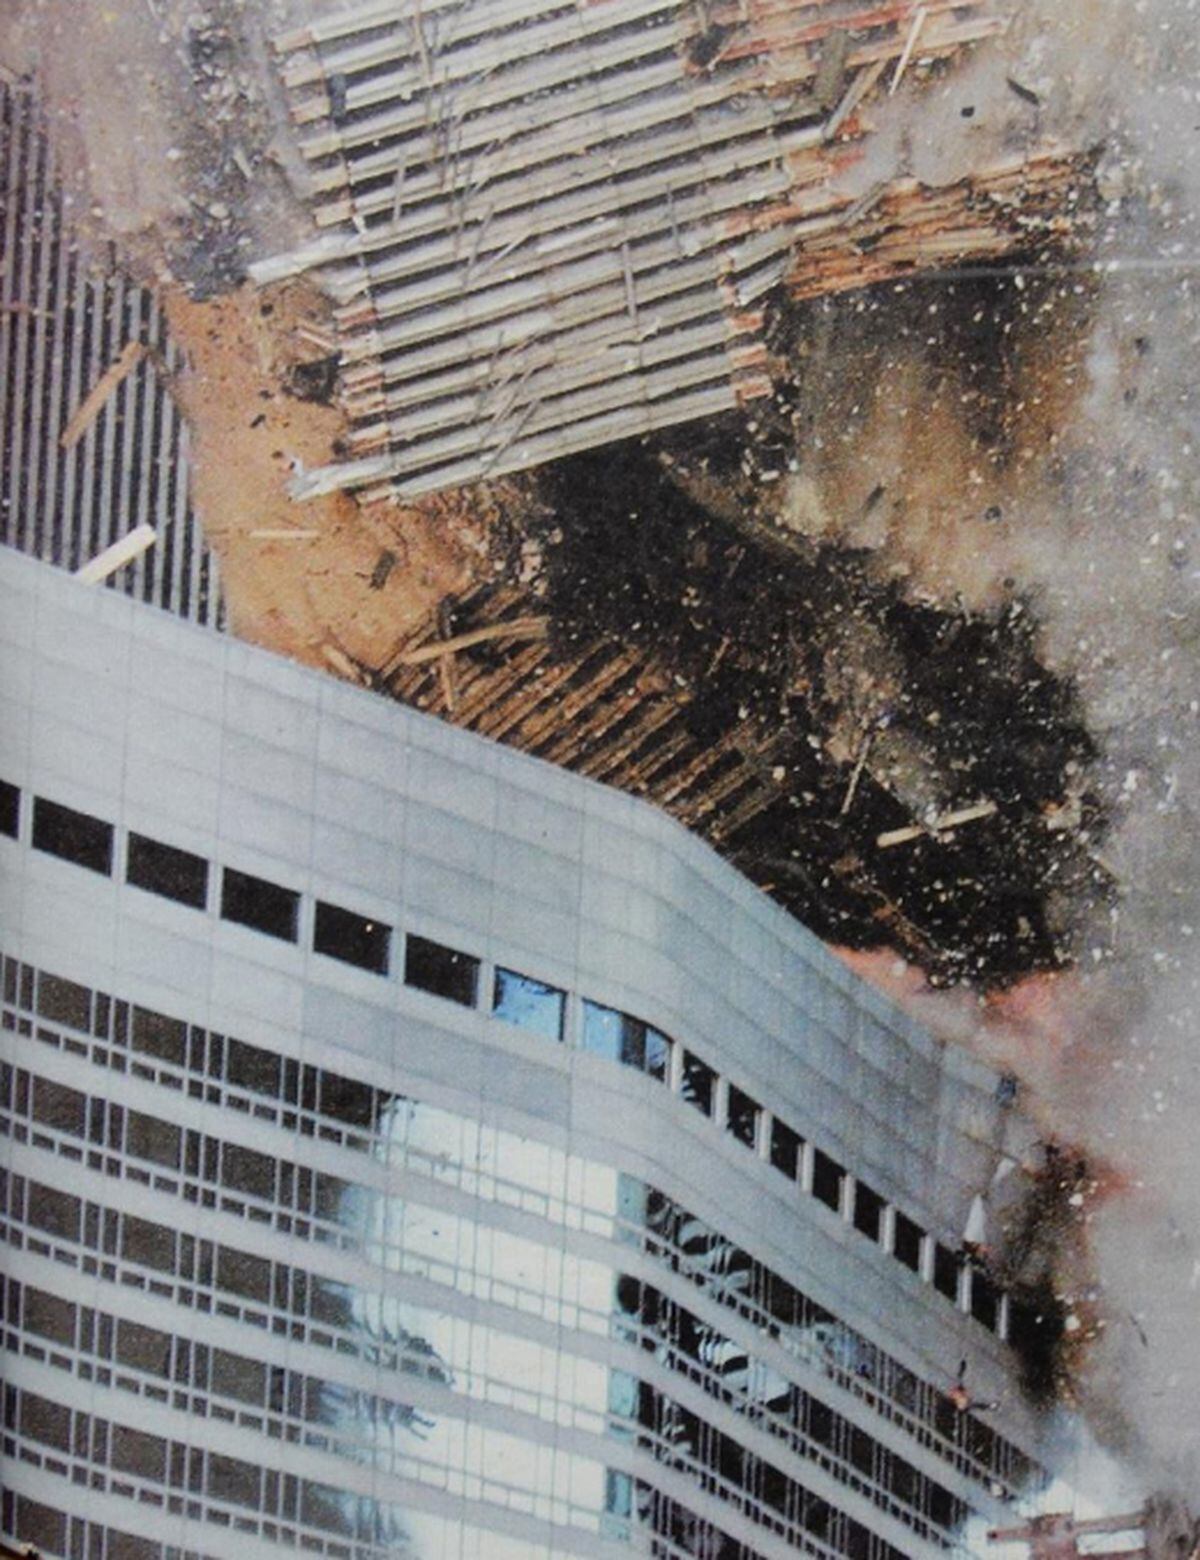 9.58am, September 11, 2001, and the South Tower collapses onto the Marriott Hotel – the top windows lit the rooftop swimming pool where Orleana Cattell had enjoyed one last swim before leaving New York not long beforehand.